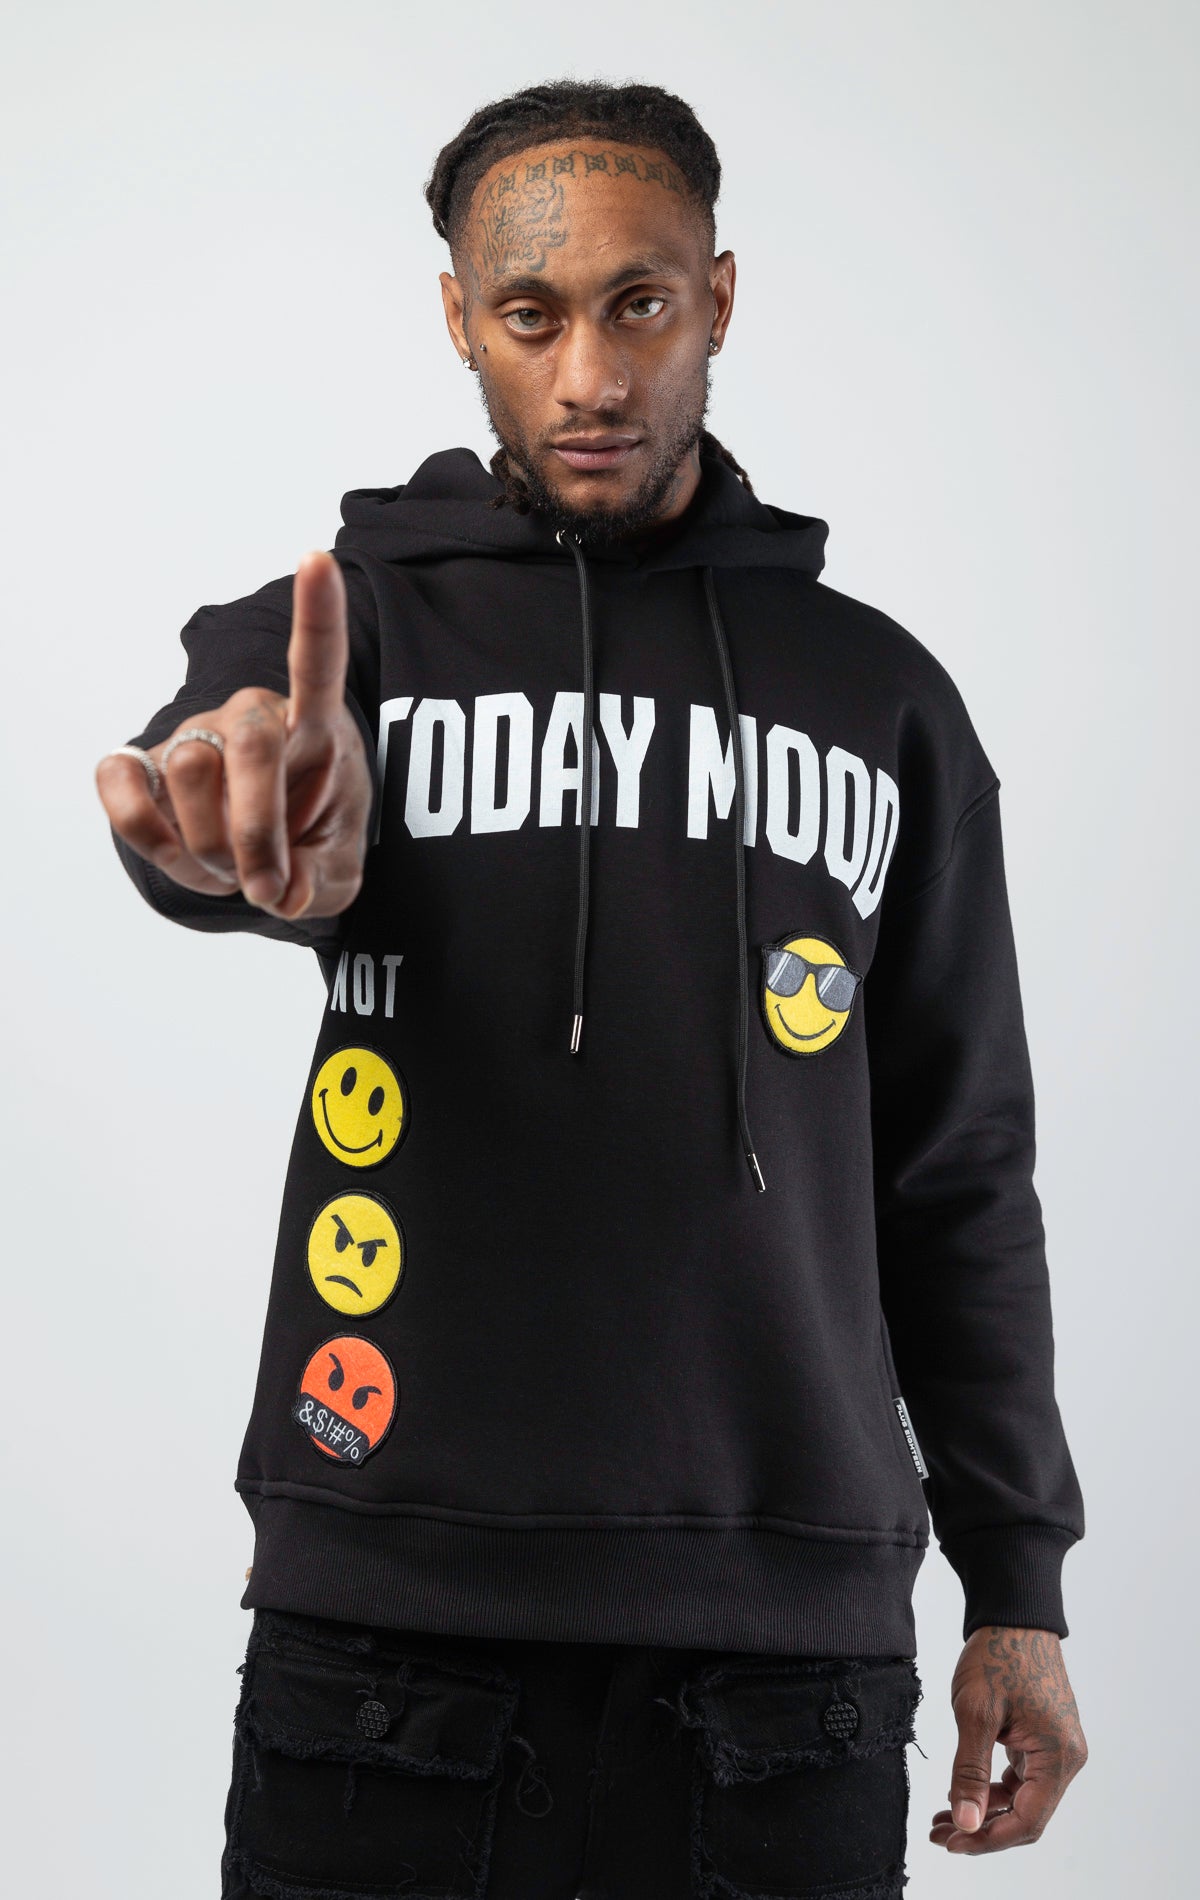 Today's mood hoodie with emoji patches